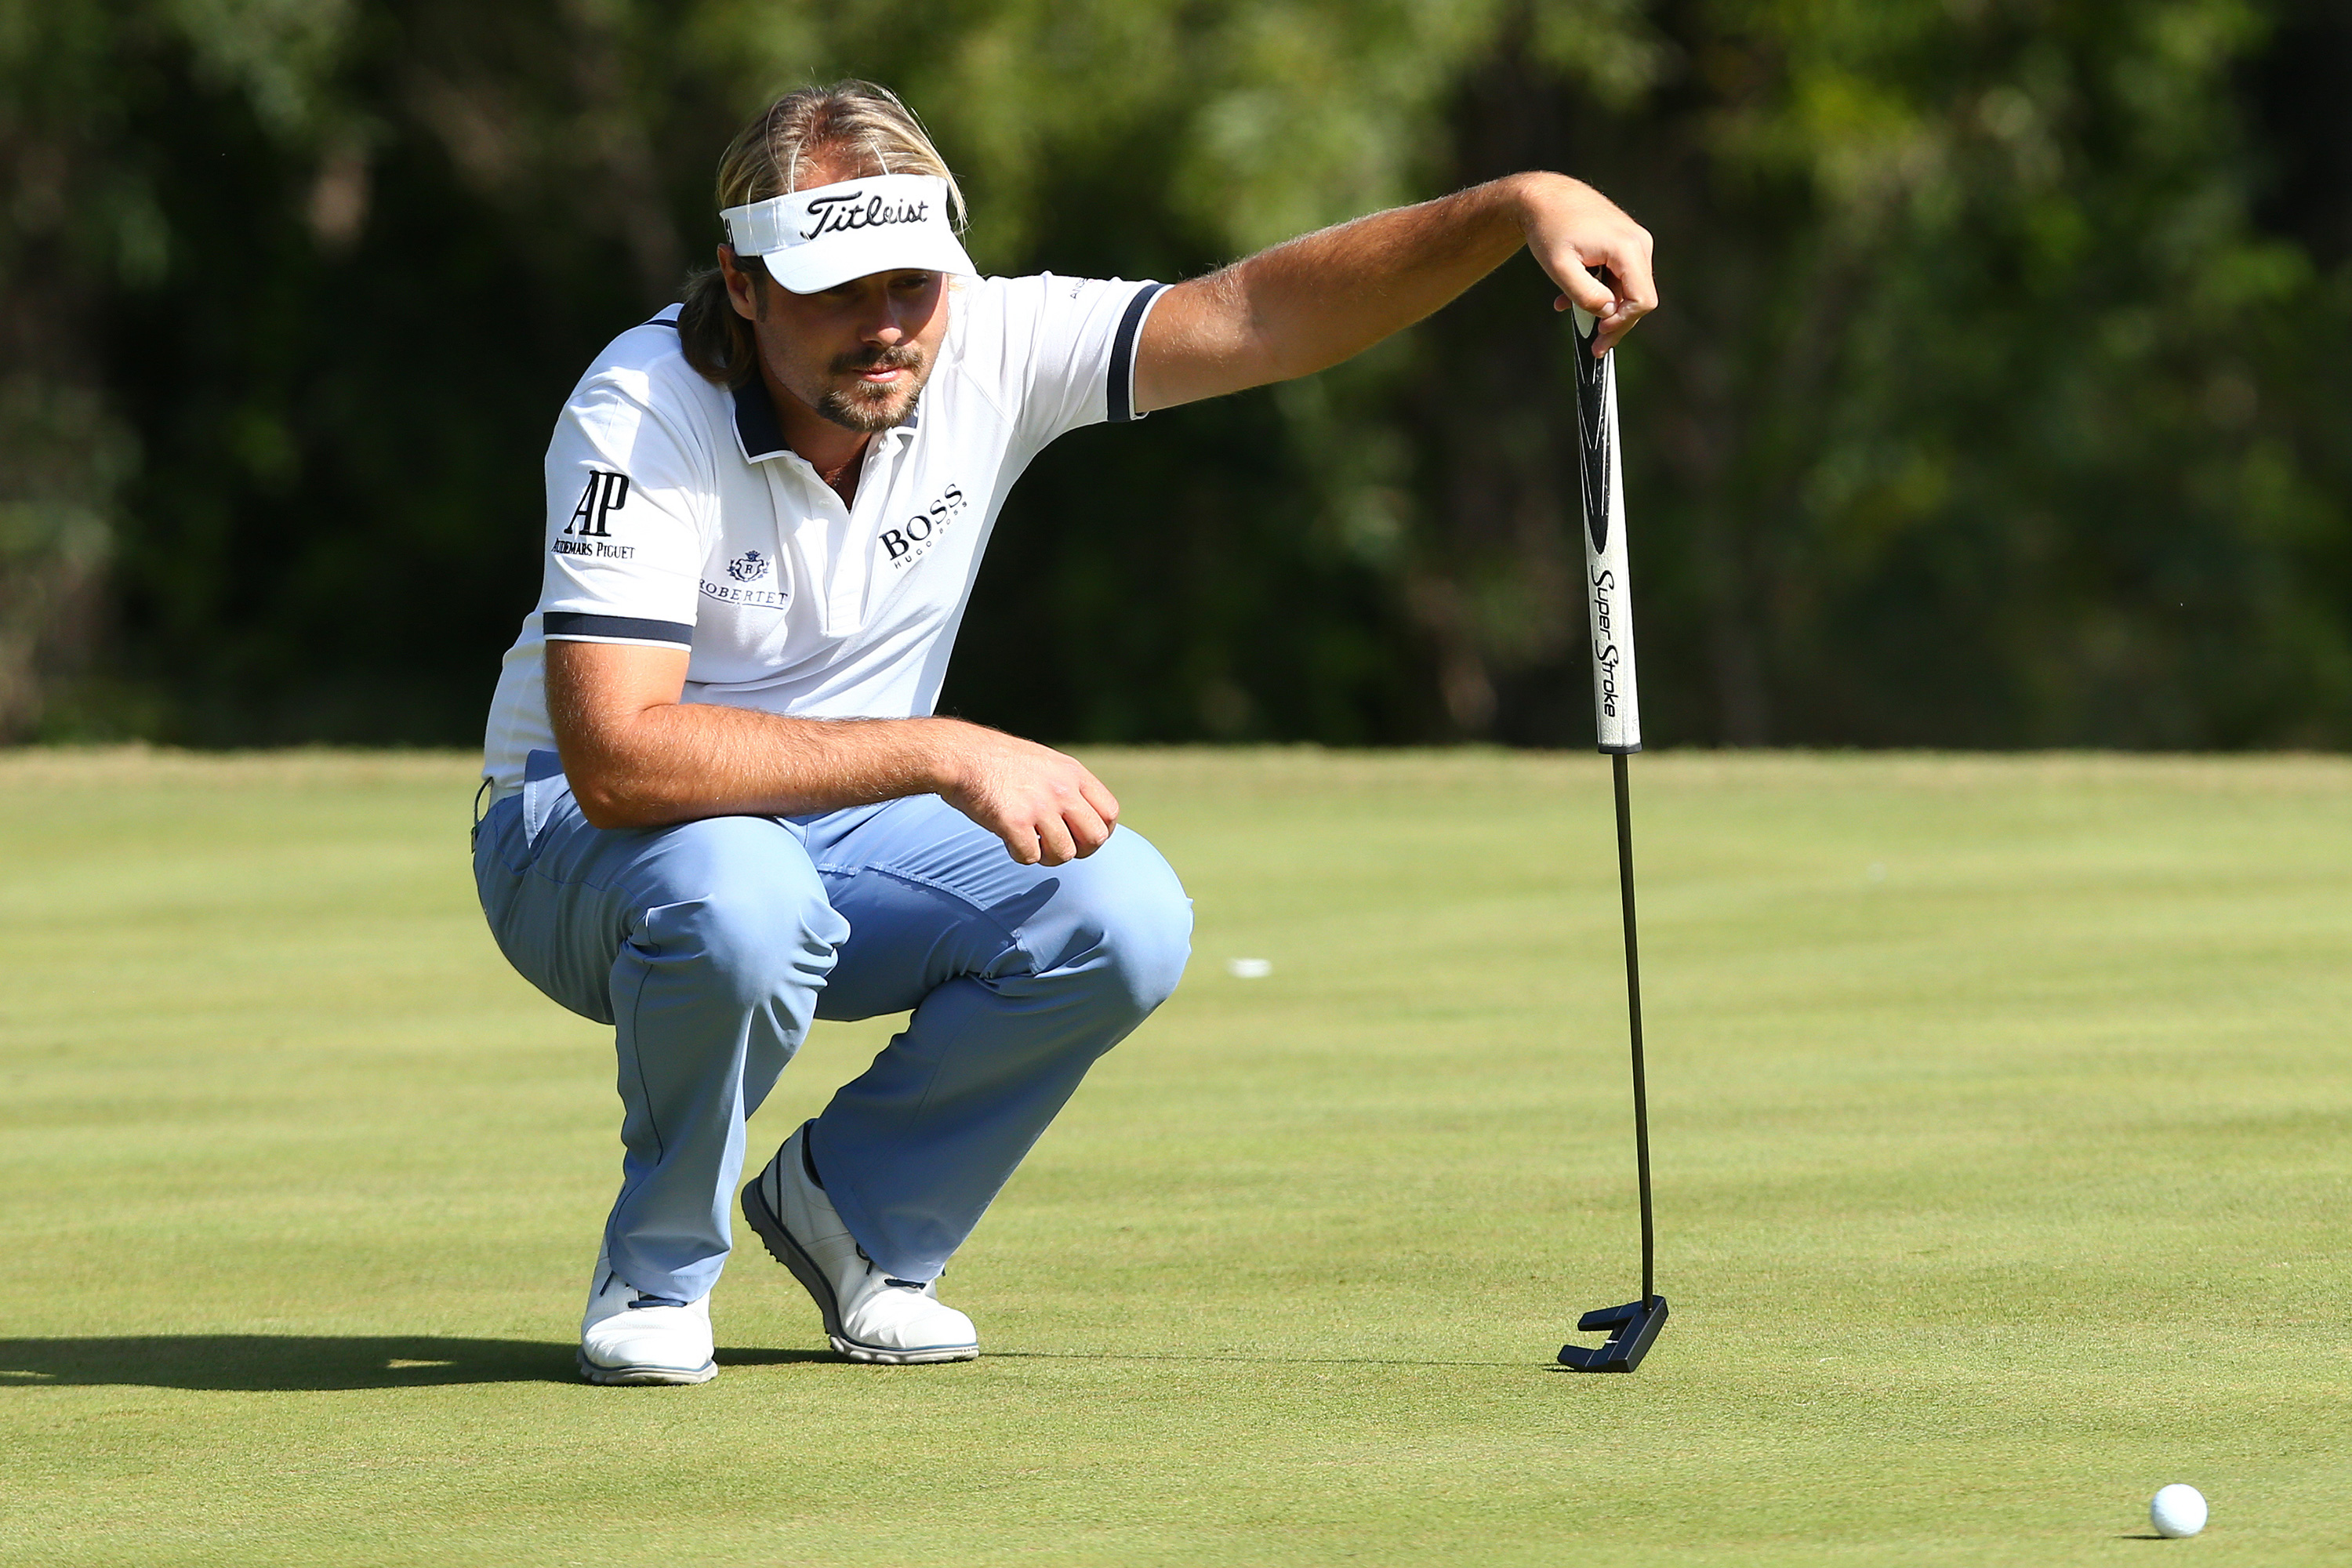 Dubuisson ranked second for the week in putts per round (26.3) with his Scotty Cameron X5 putter